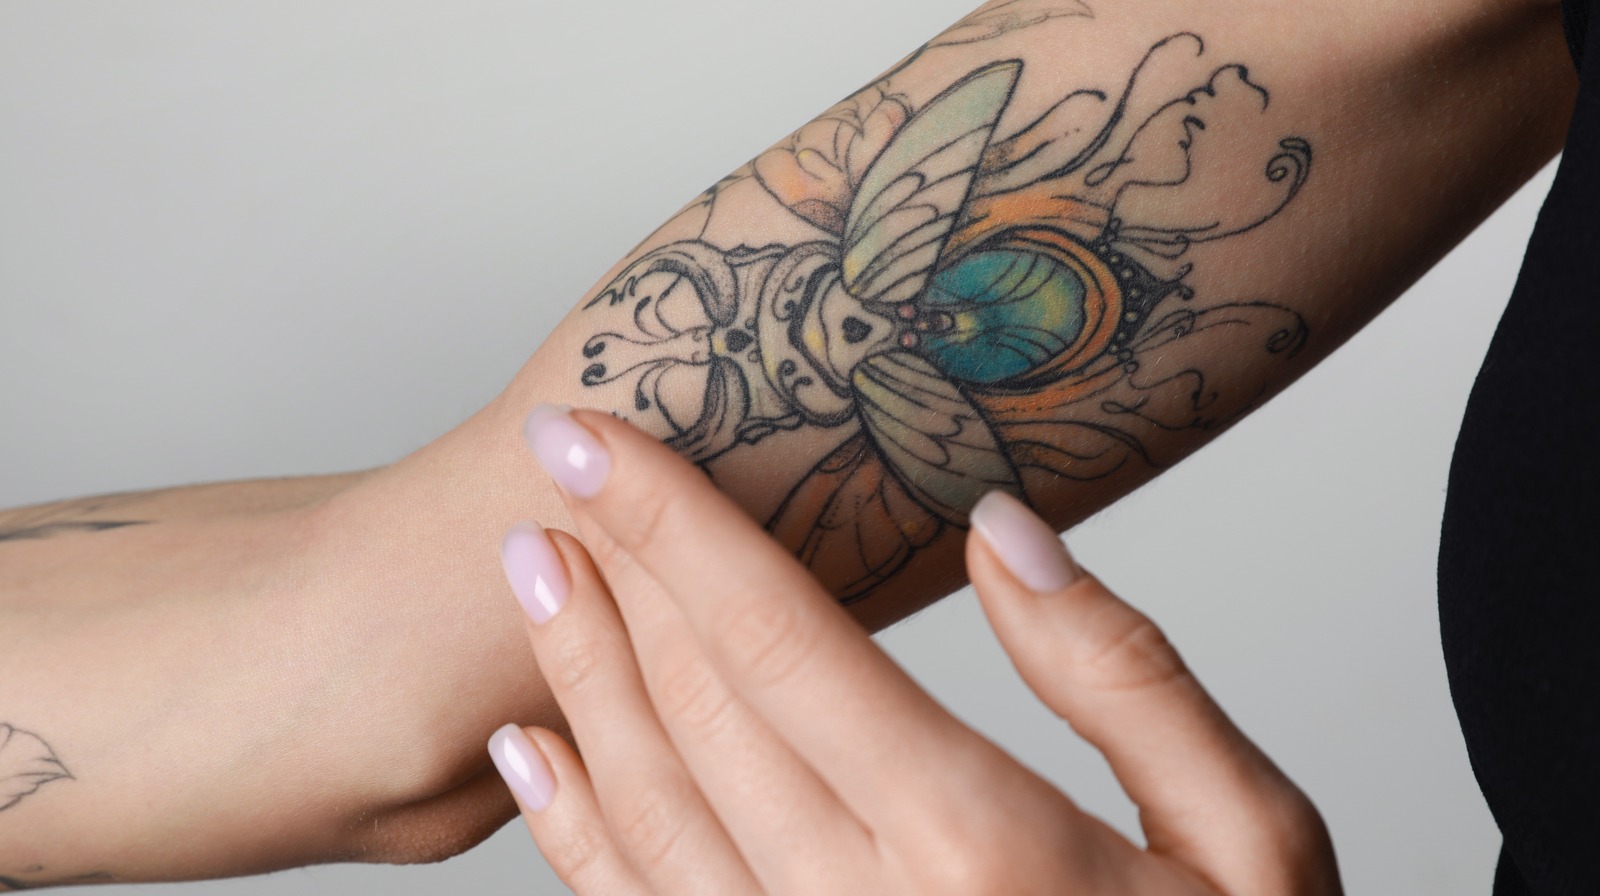 How to prep skin for tattoo